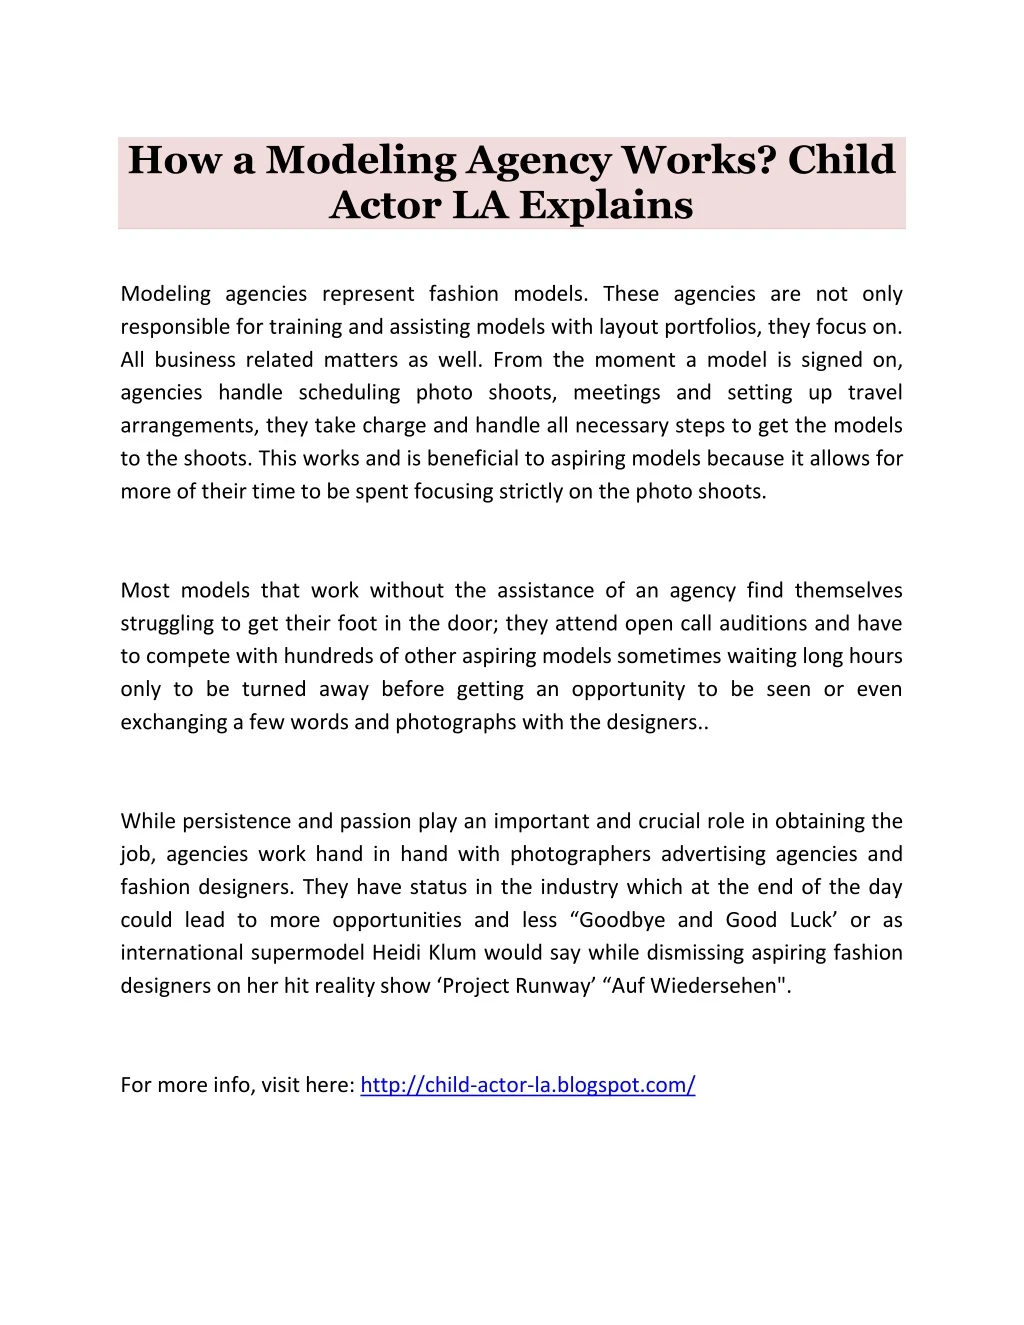 how a modeling agency works child actor